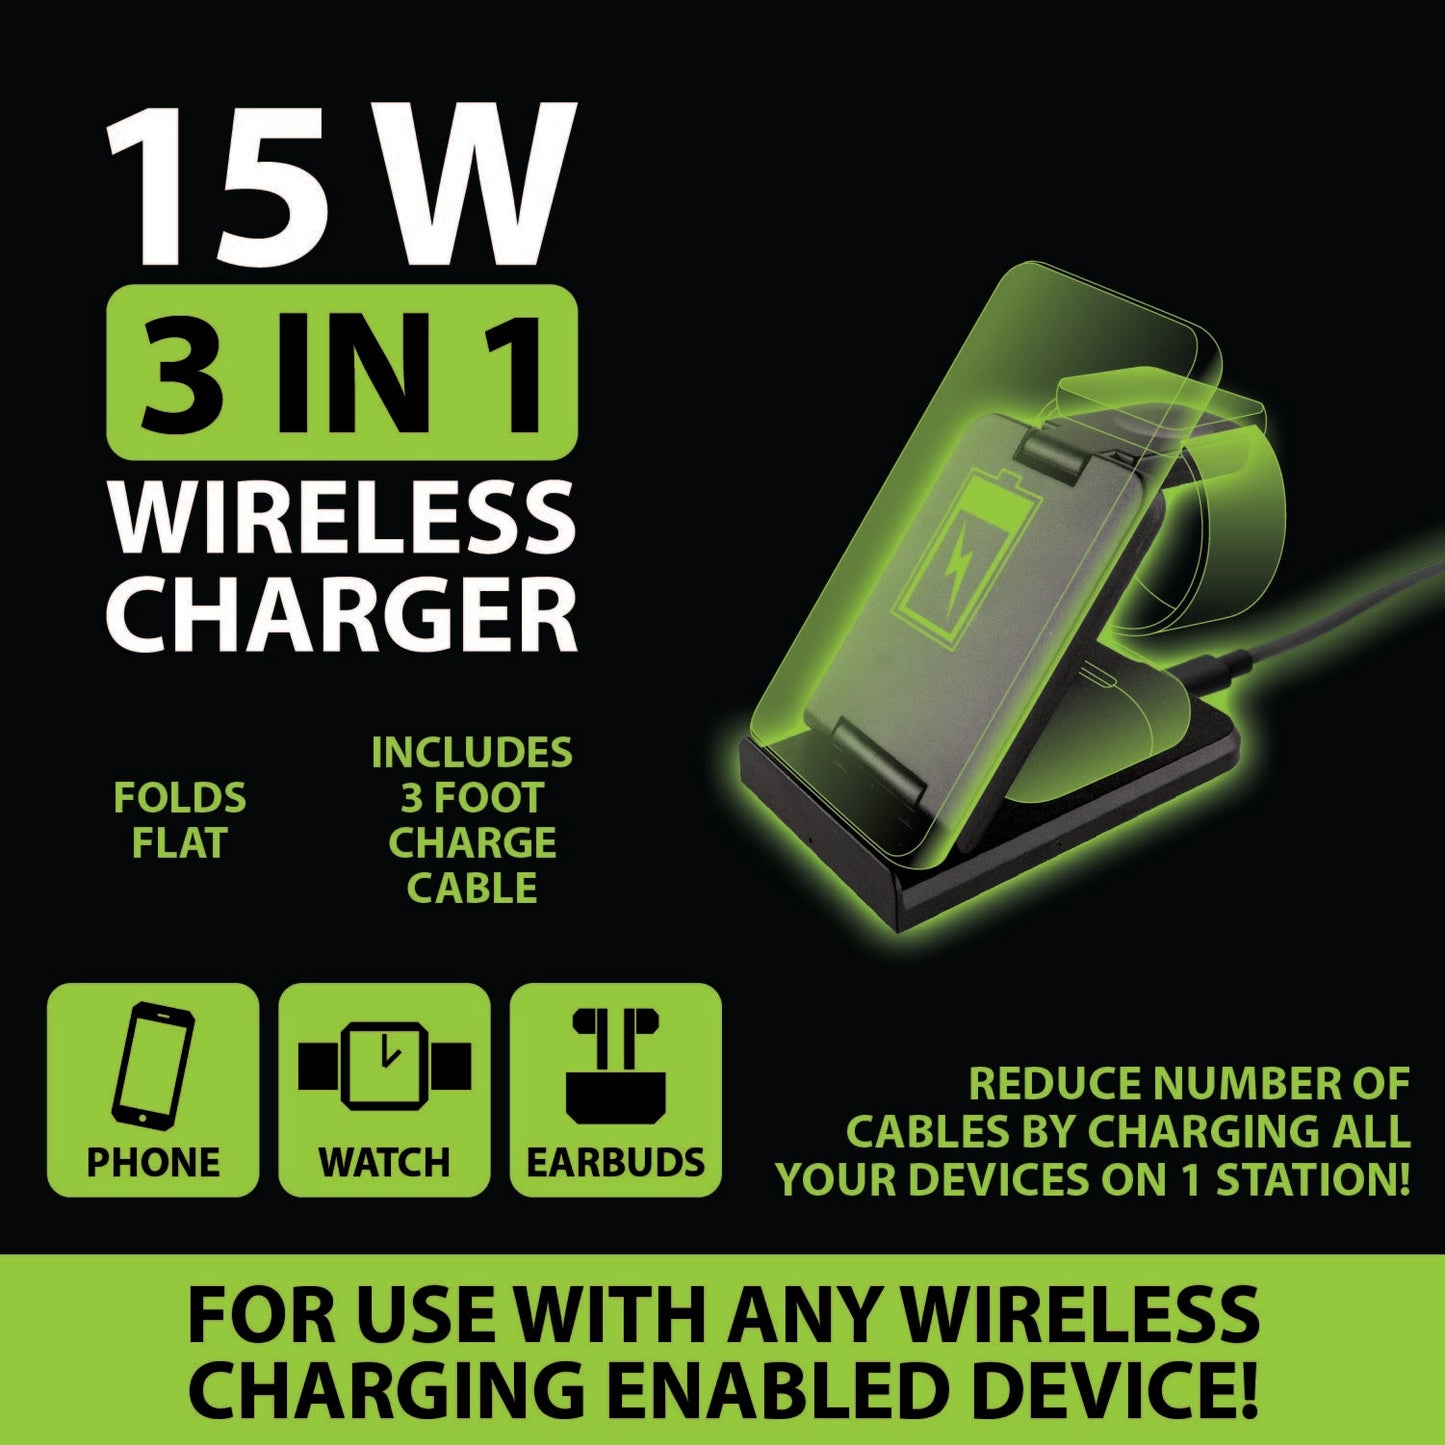 ITEM NUMBER 022827L 3 IN 1 CHARGER - STORE SURPLUS NO DISPLAY 4 PIECES PER PACK